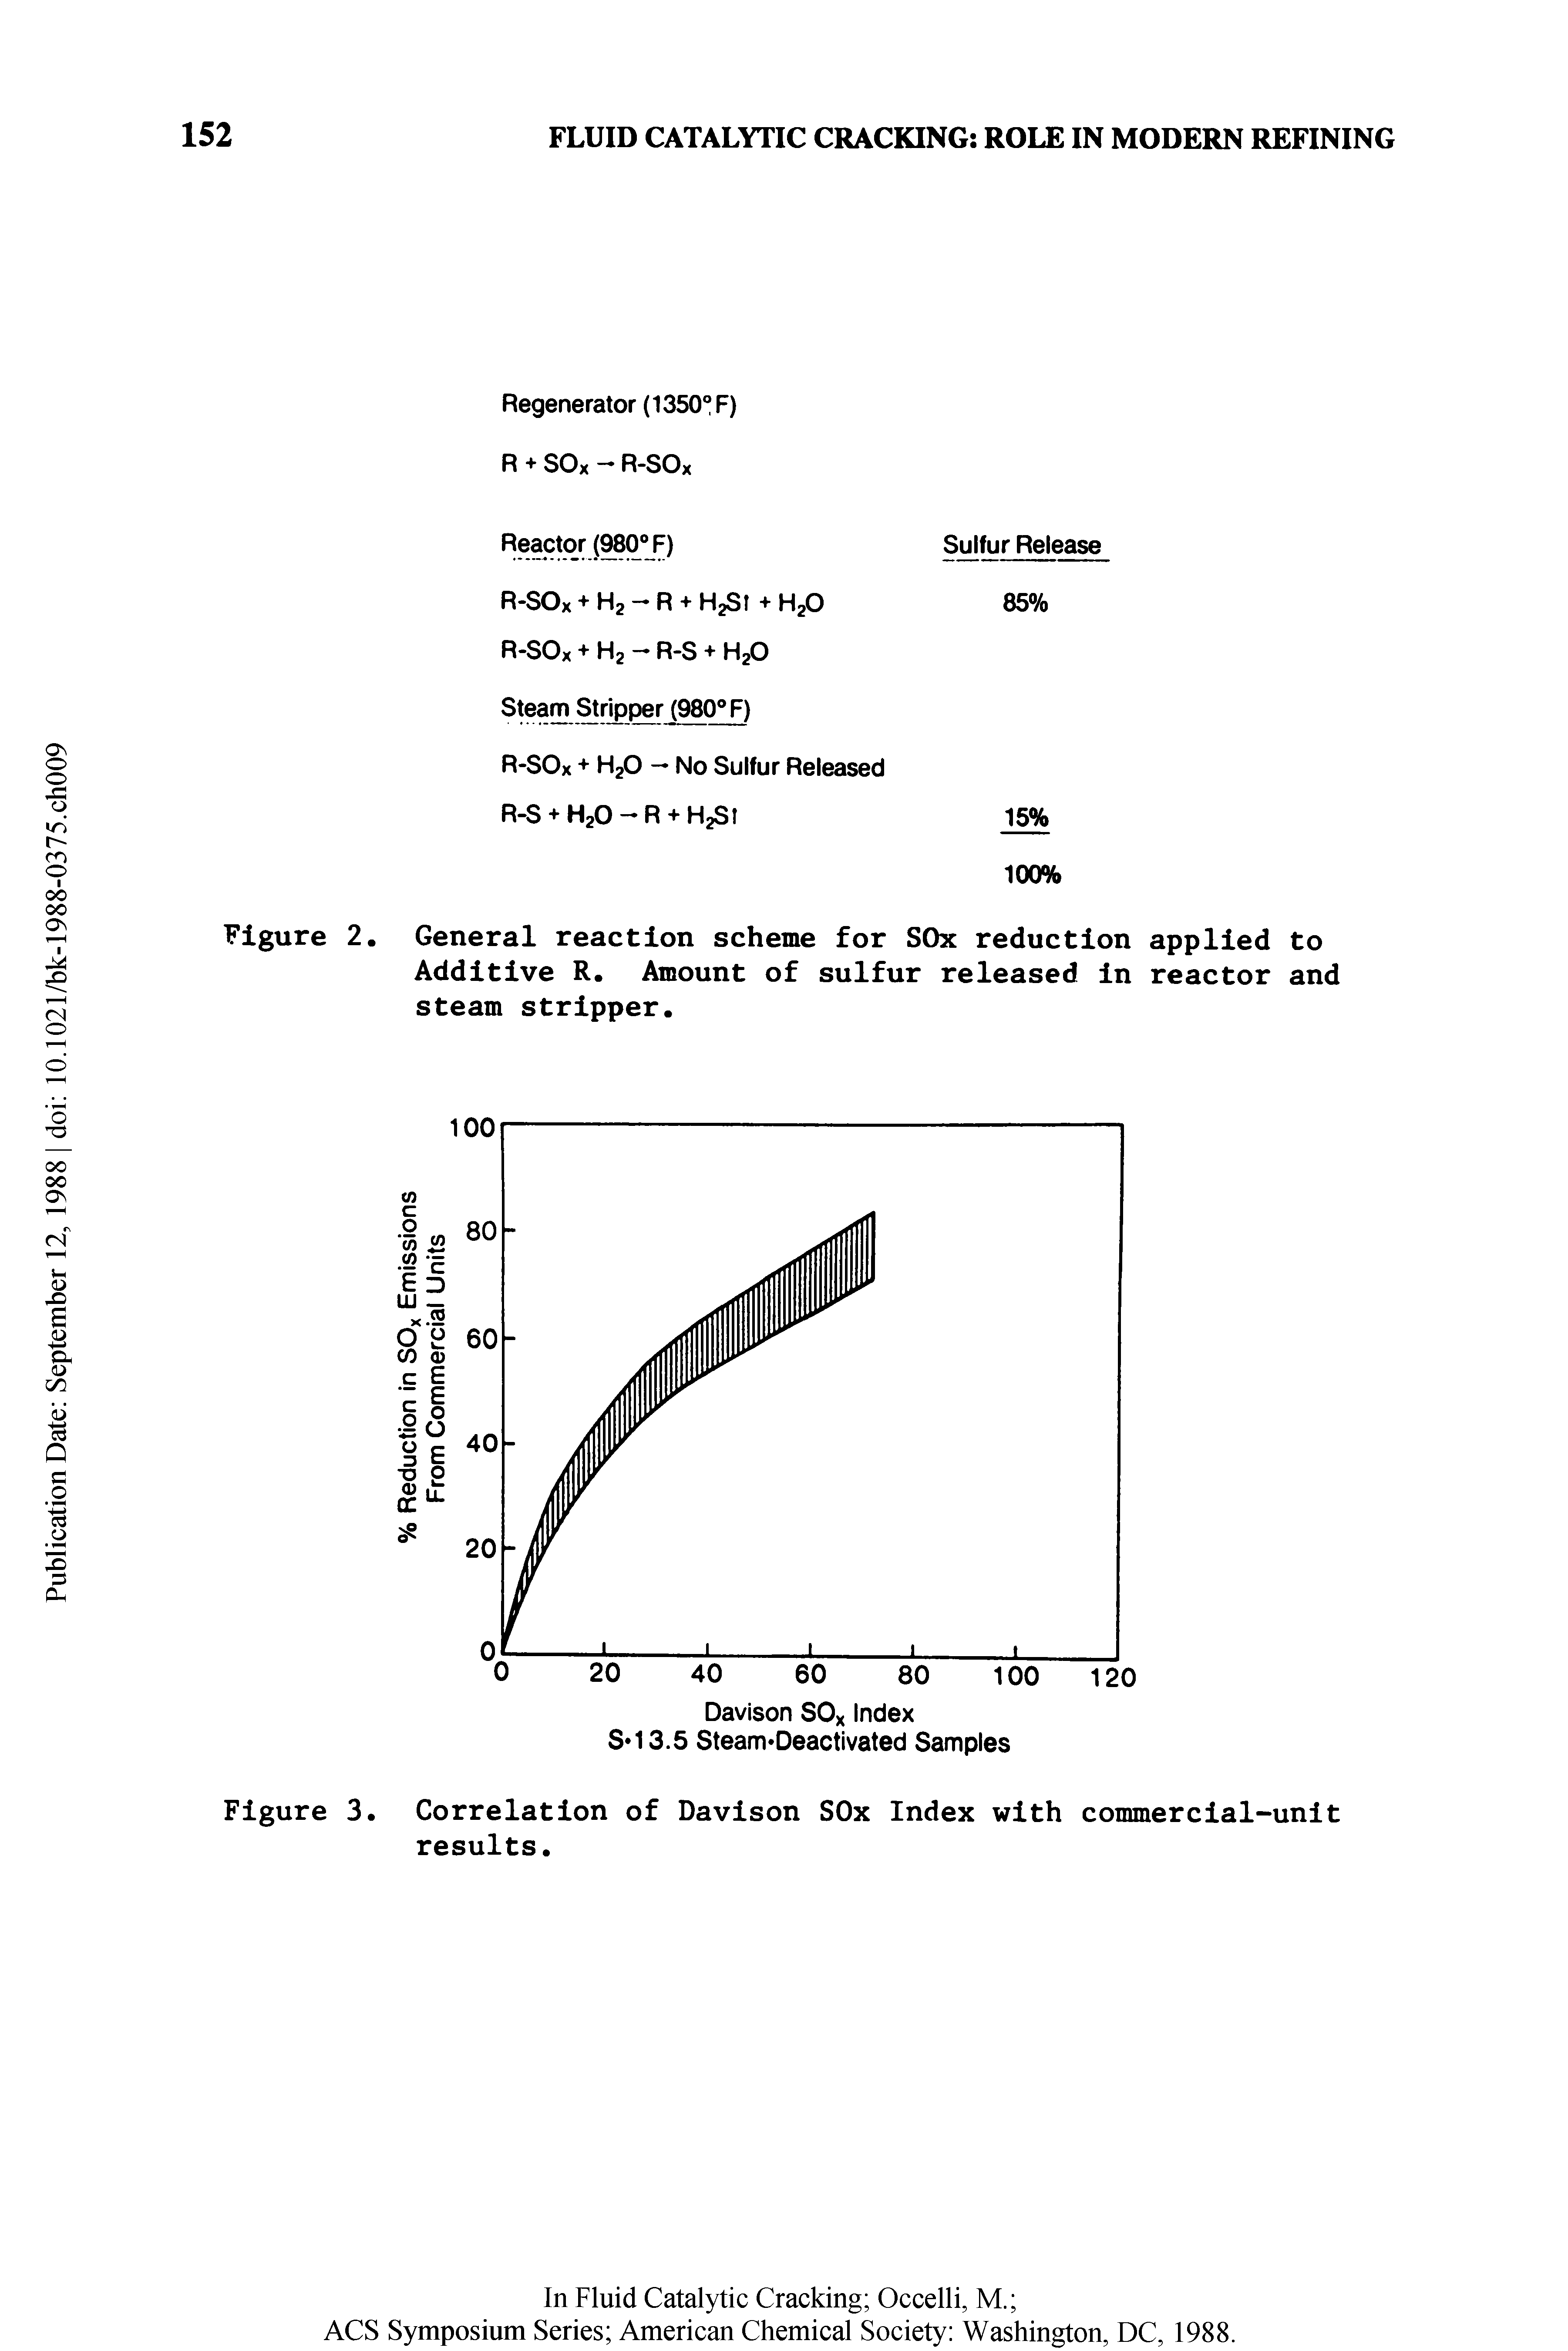 Figure 2. General reaction scheme for SOx reduction applied to Additive R. Amount of sulfur released in reactor and steam stripper.